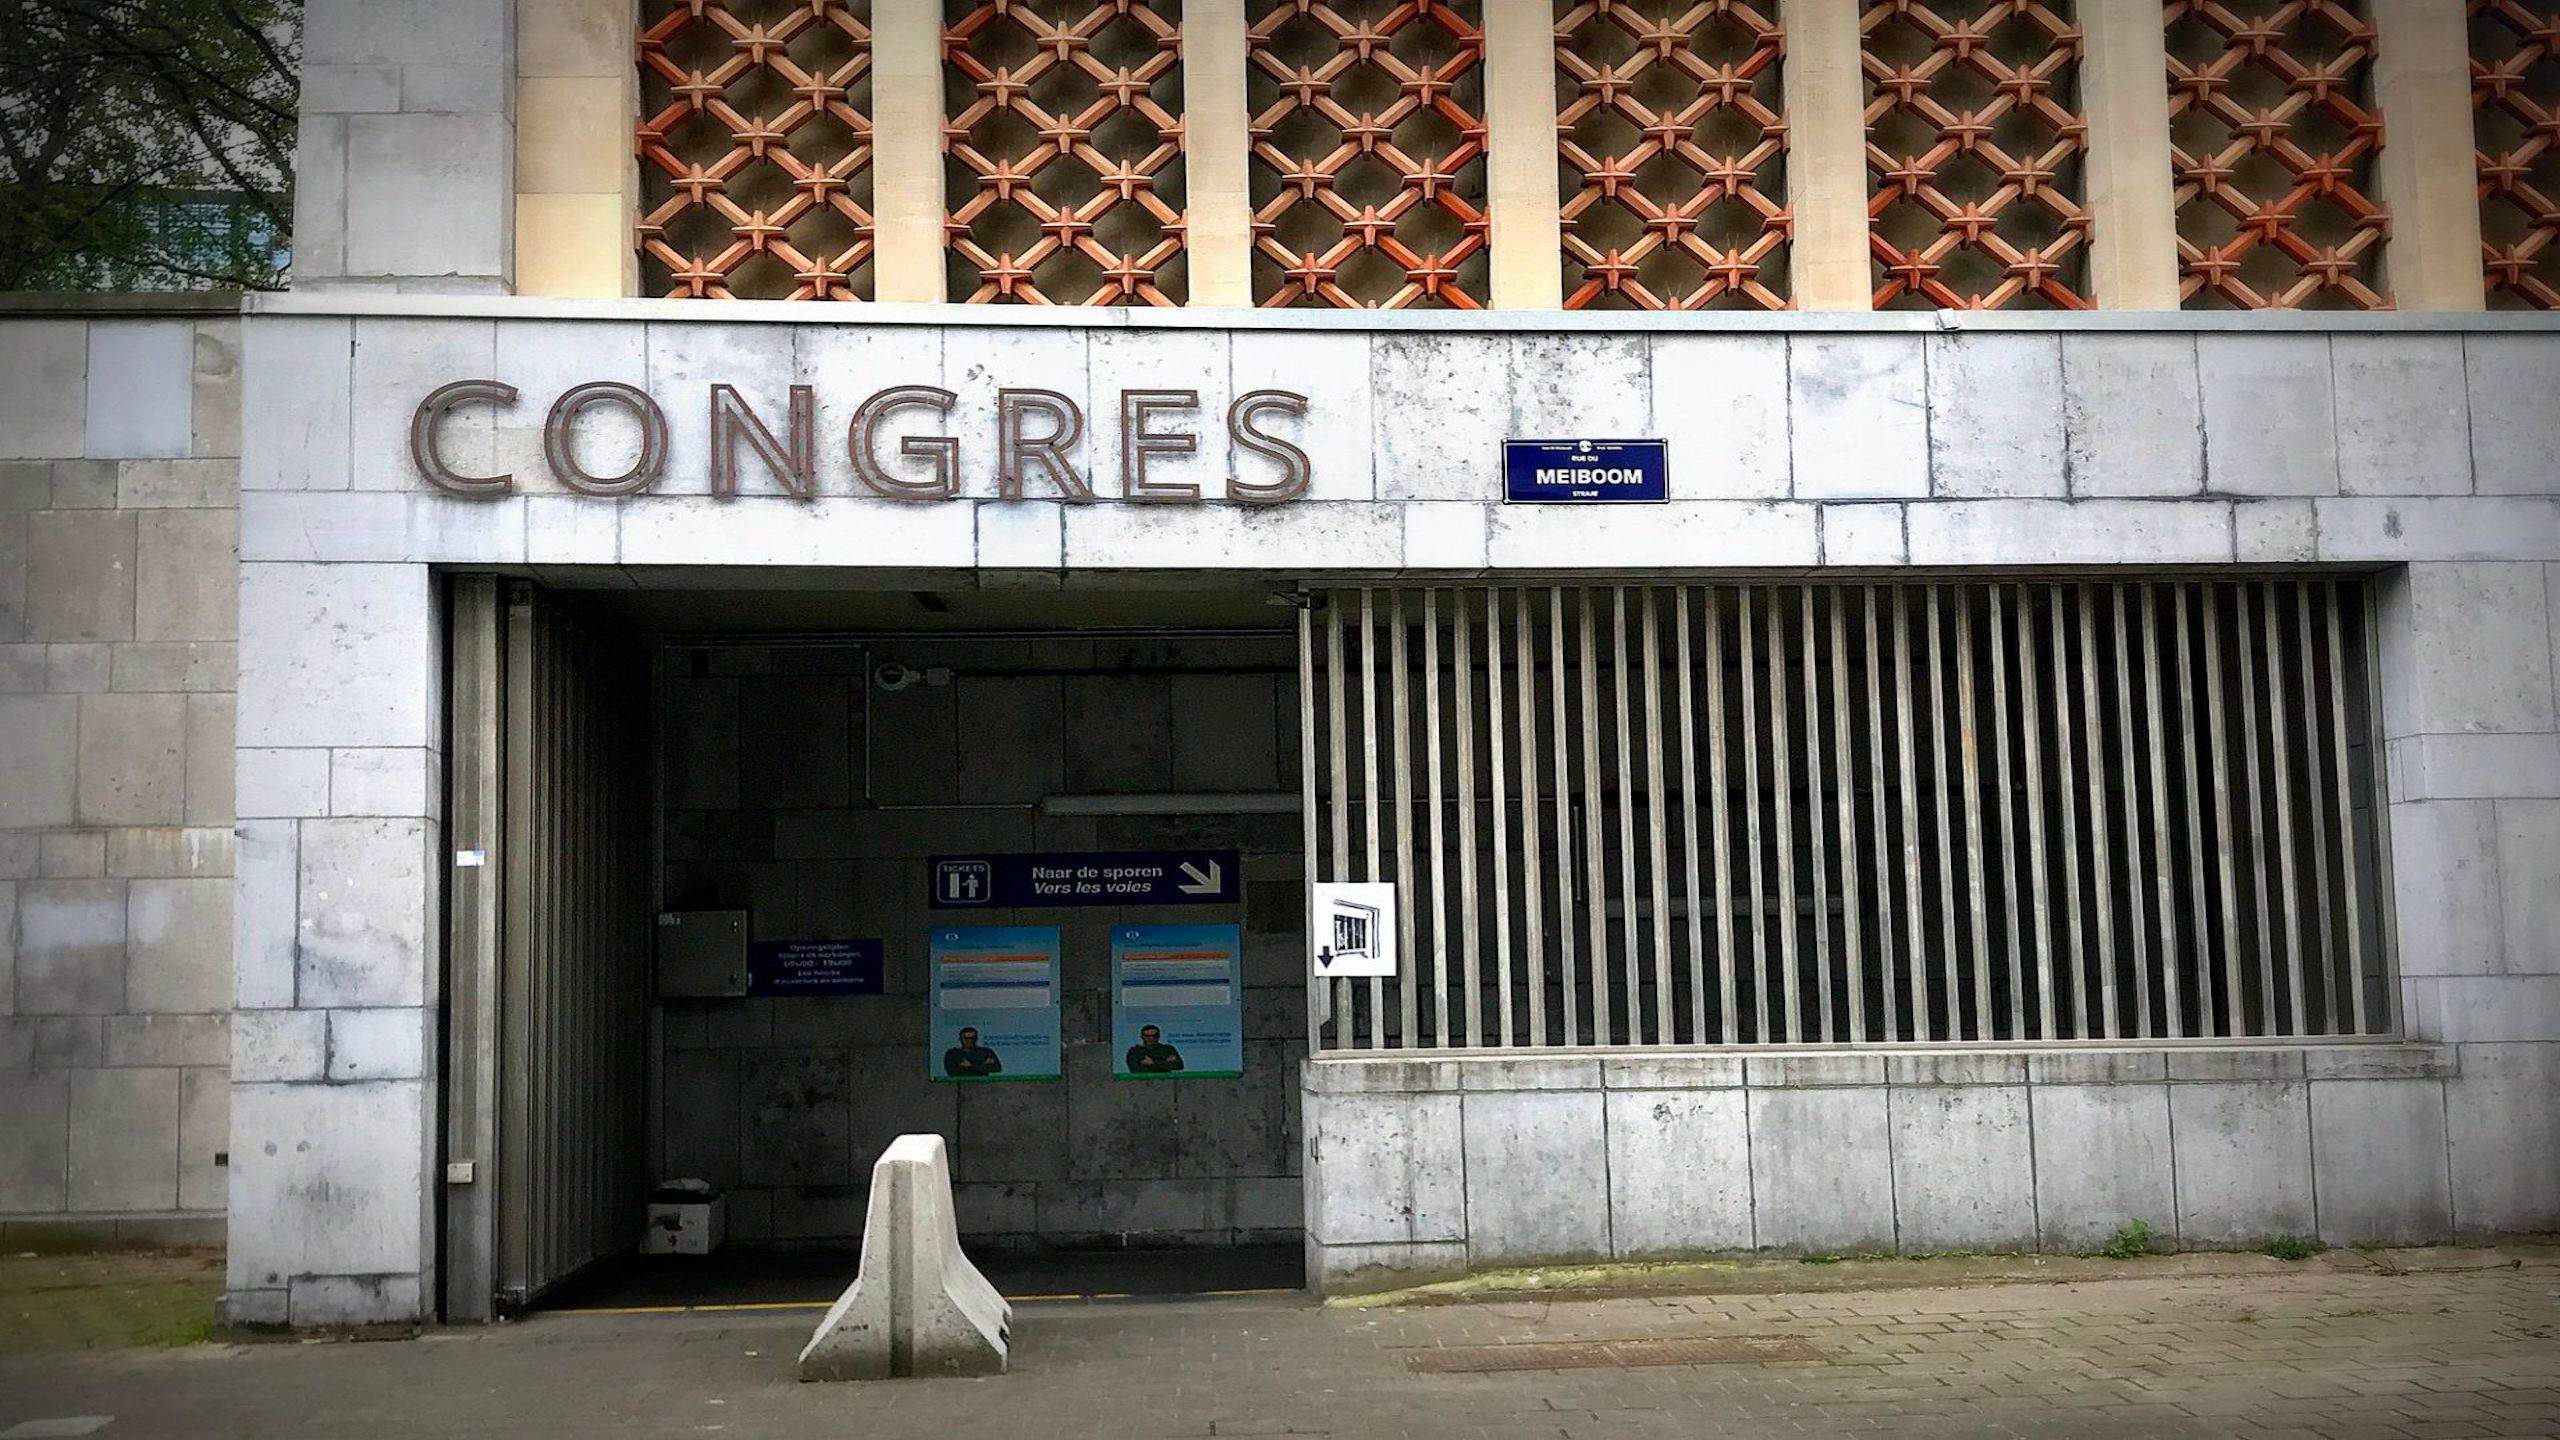 Congres Station photo